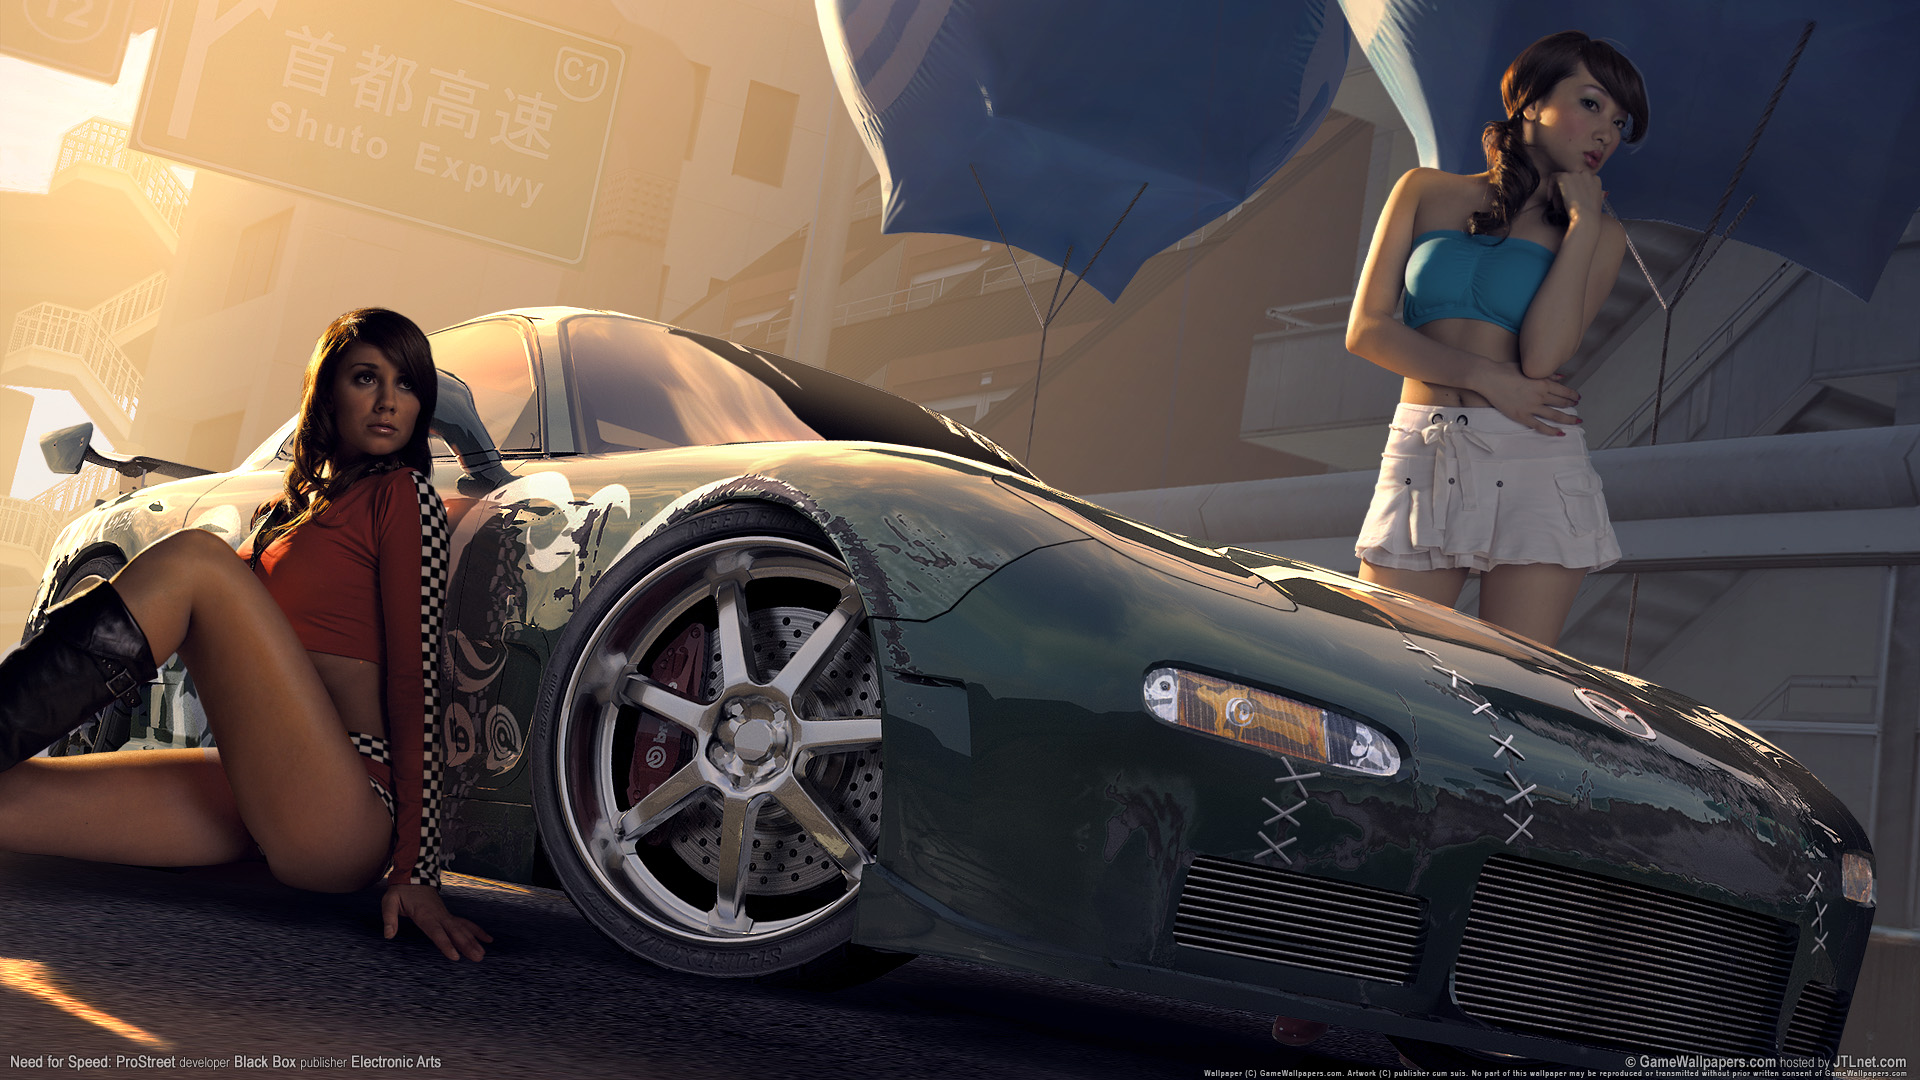 1920x1080 > Need For Speed: ProStreet Wallpapers